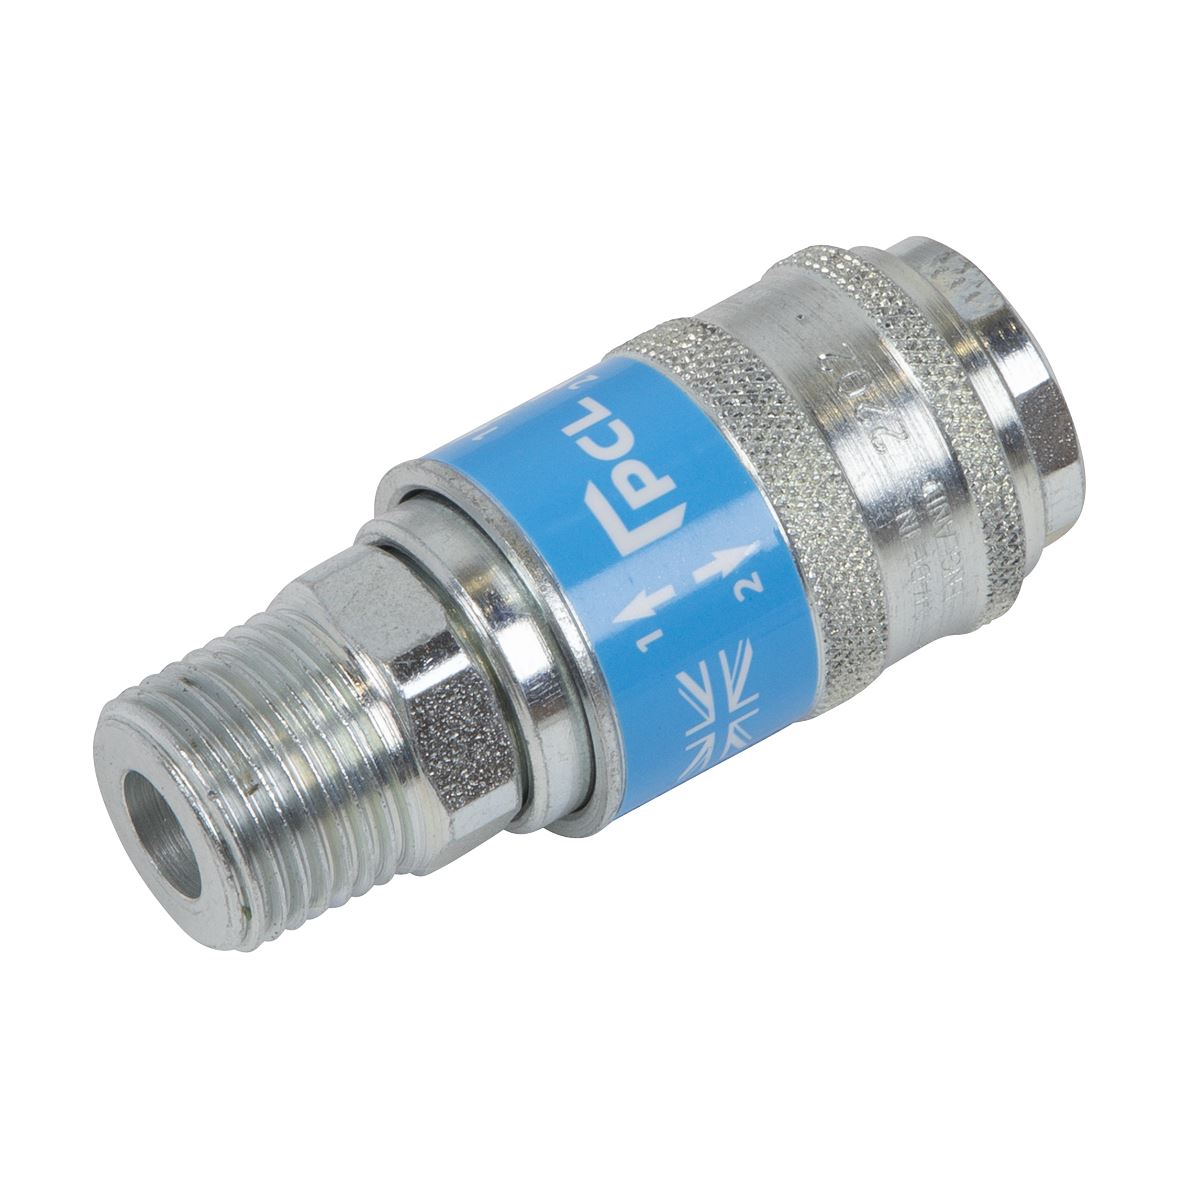 PCL Safeflow Safety Coupling Body Male 1/2"BSP